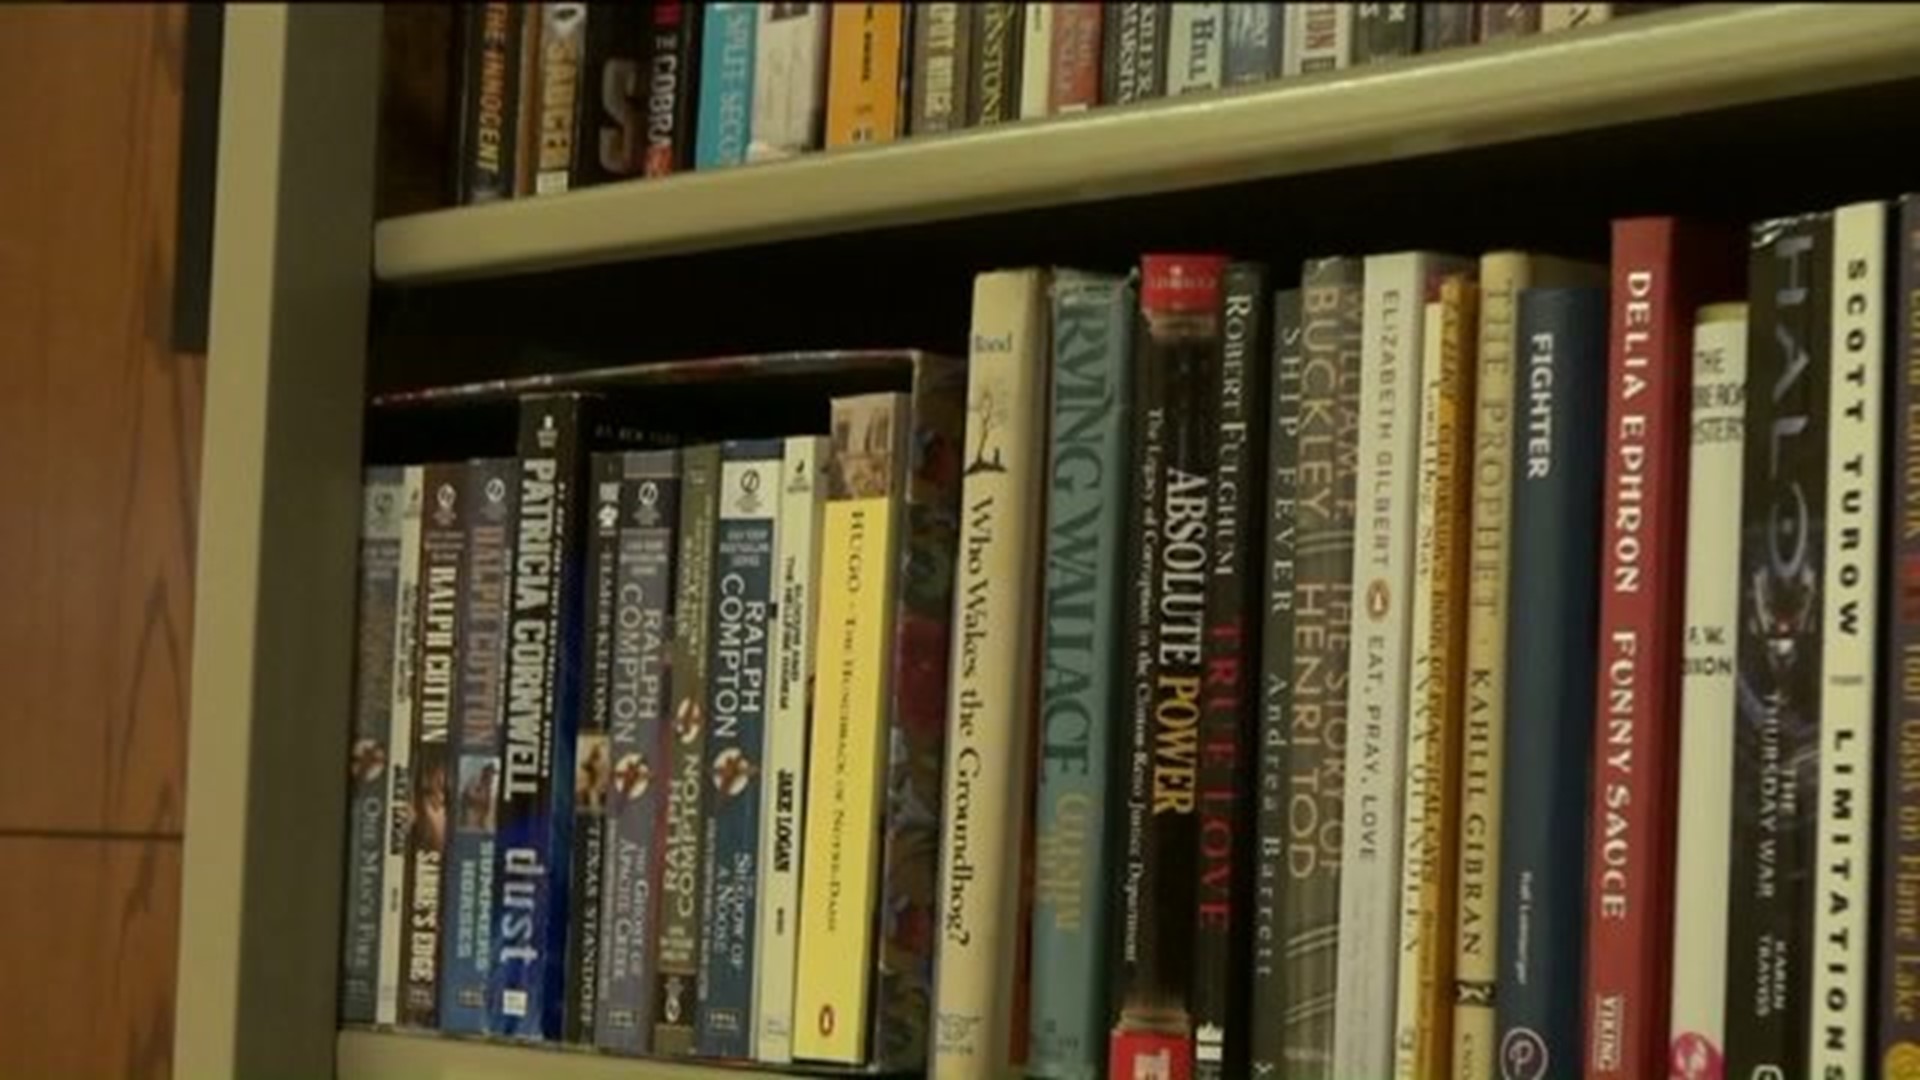 Thanks to Hundreds of Book Donations, VA Medical Center Receives Library on Wheels